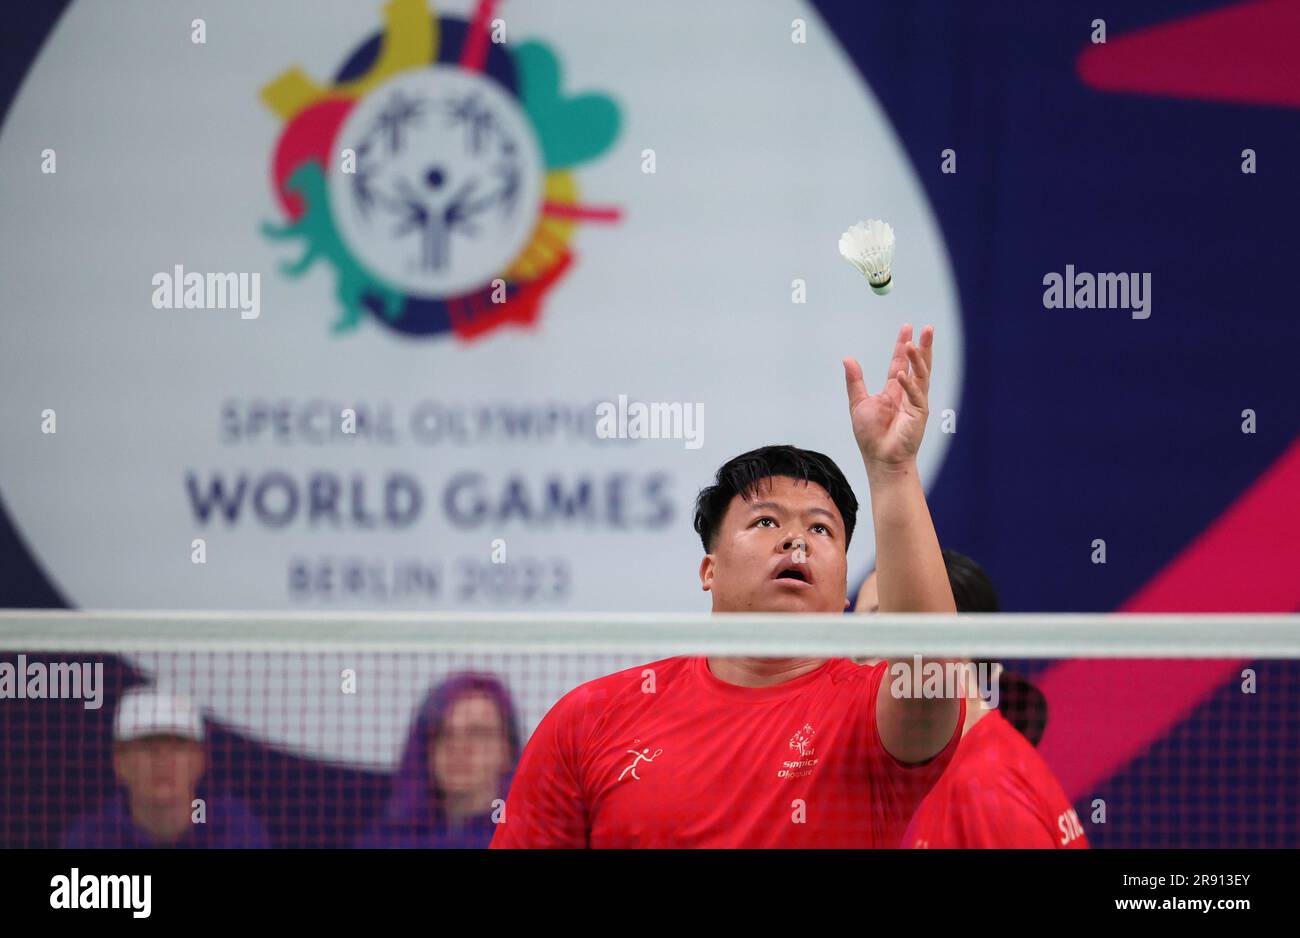 Berlin, Germany. 21st June, 2023. SO Singapore Tan/Bin Razid v SO Korea Lim/Lee compete on the badminton mixed doubles during the Special Olympics World Games Berlin 2023, the world's largest inclusive sports event where thousands of athletes with intellectual disabilities compete together in 26 sports from 17 to 25 June 2023. Credit: Isabel Infantes/Empics/Alamy Live News Stock Photo